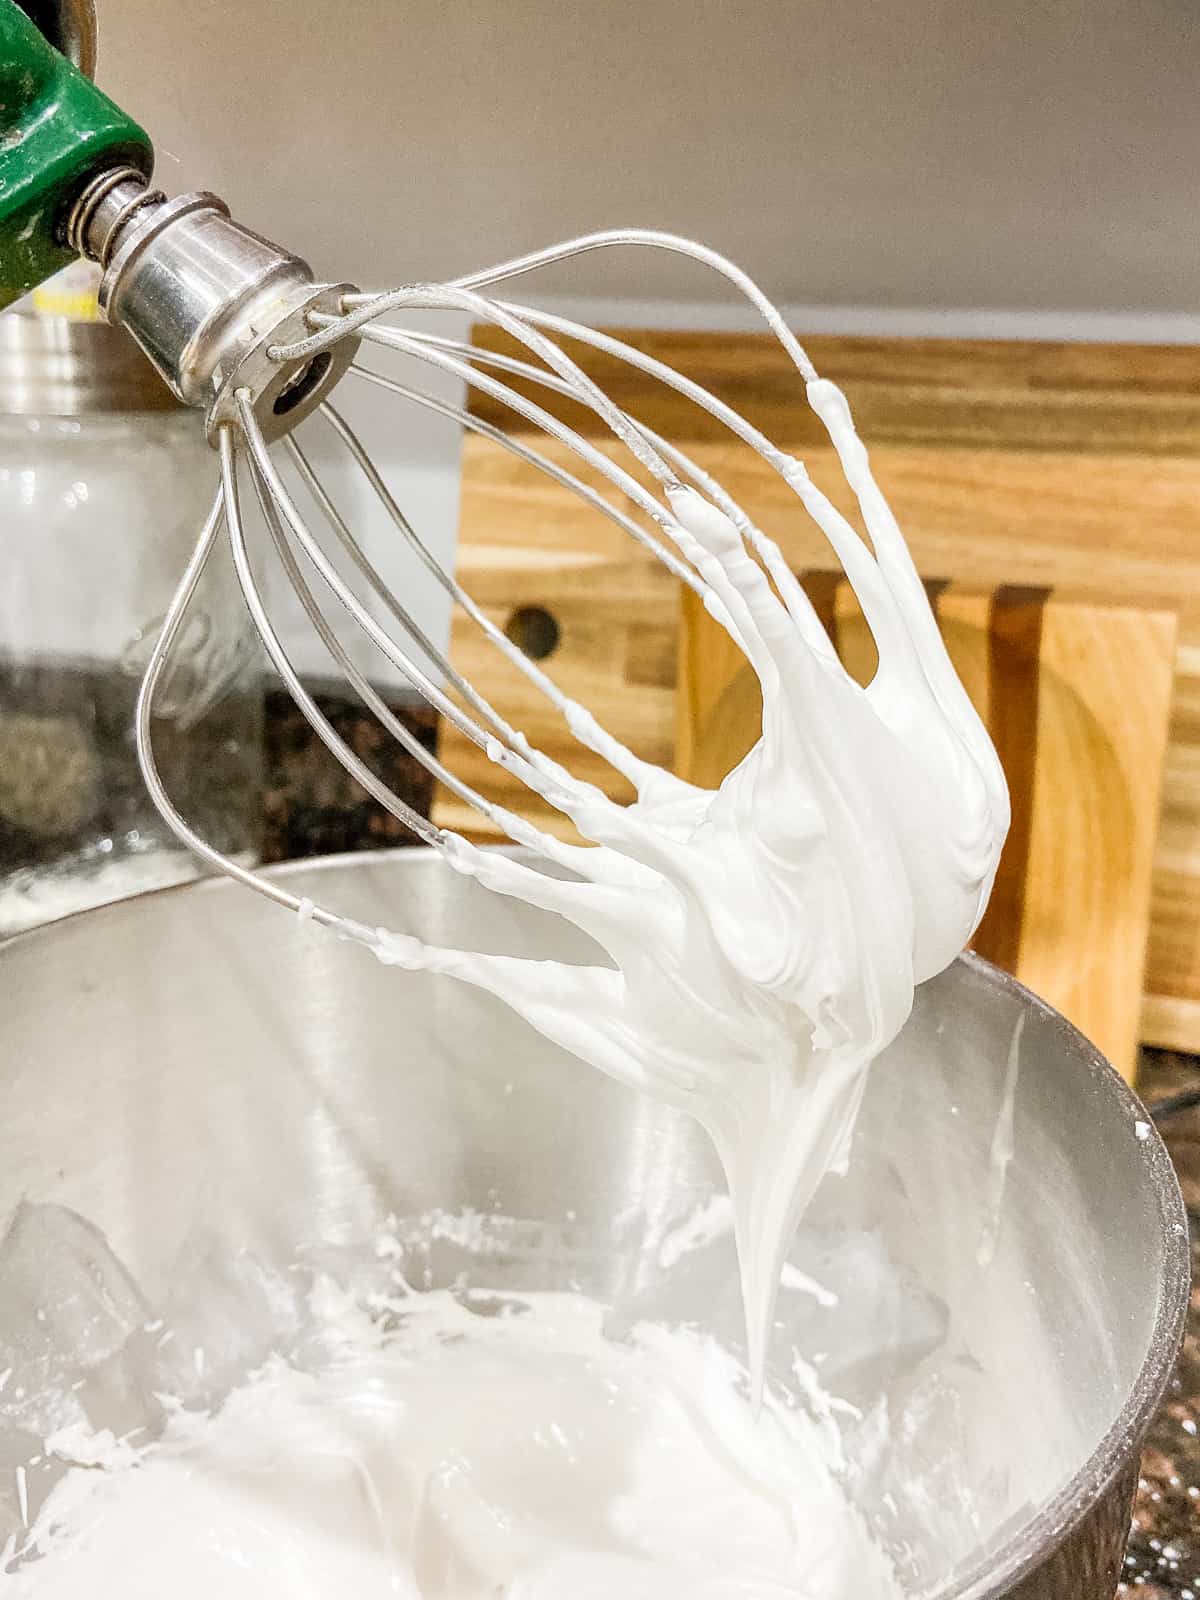 Balloon whisk on stand mixer with royal icing to show consistency of icing